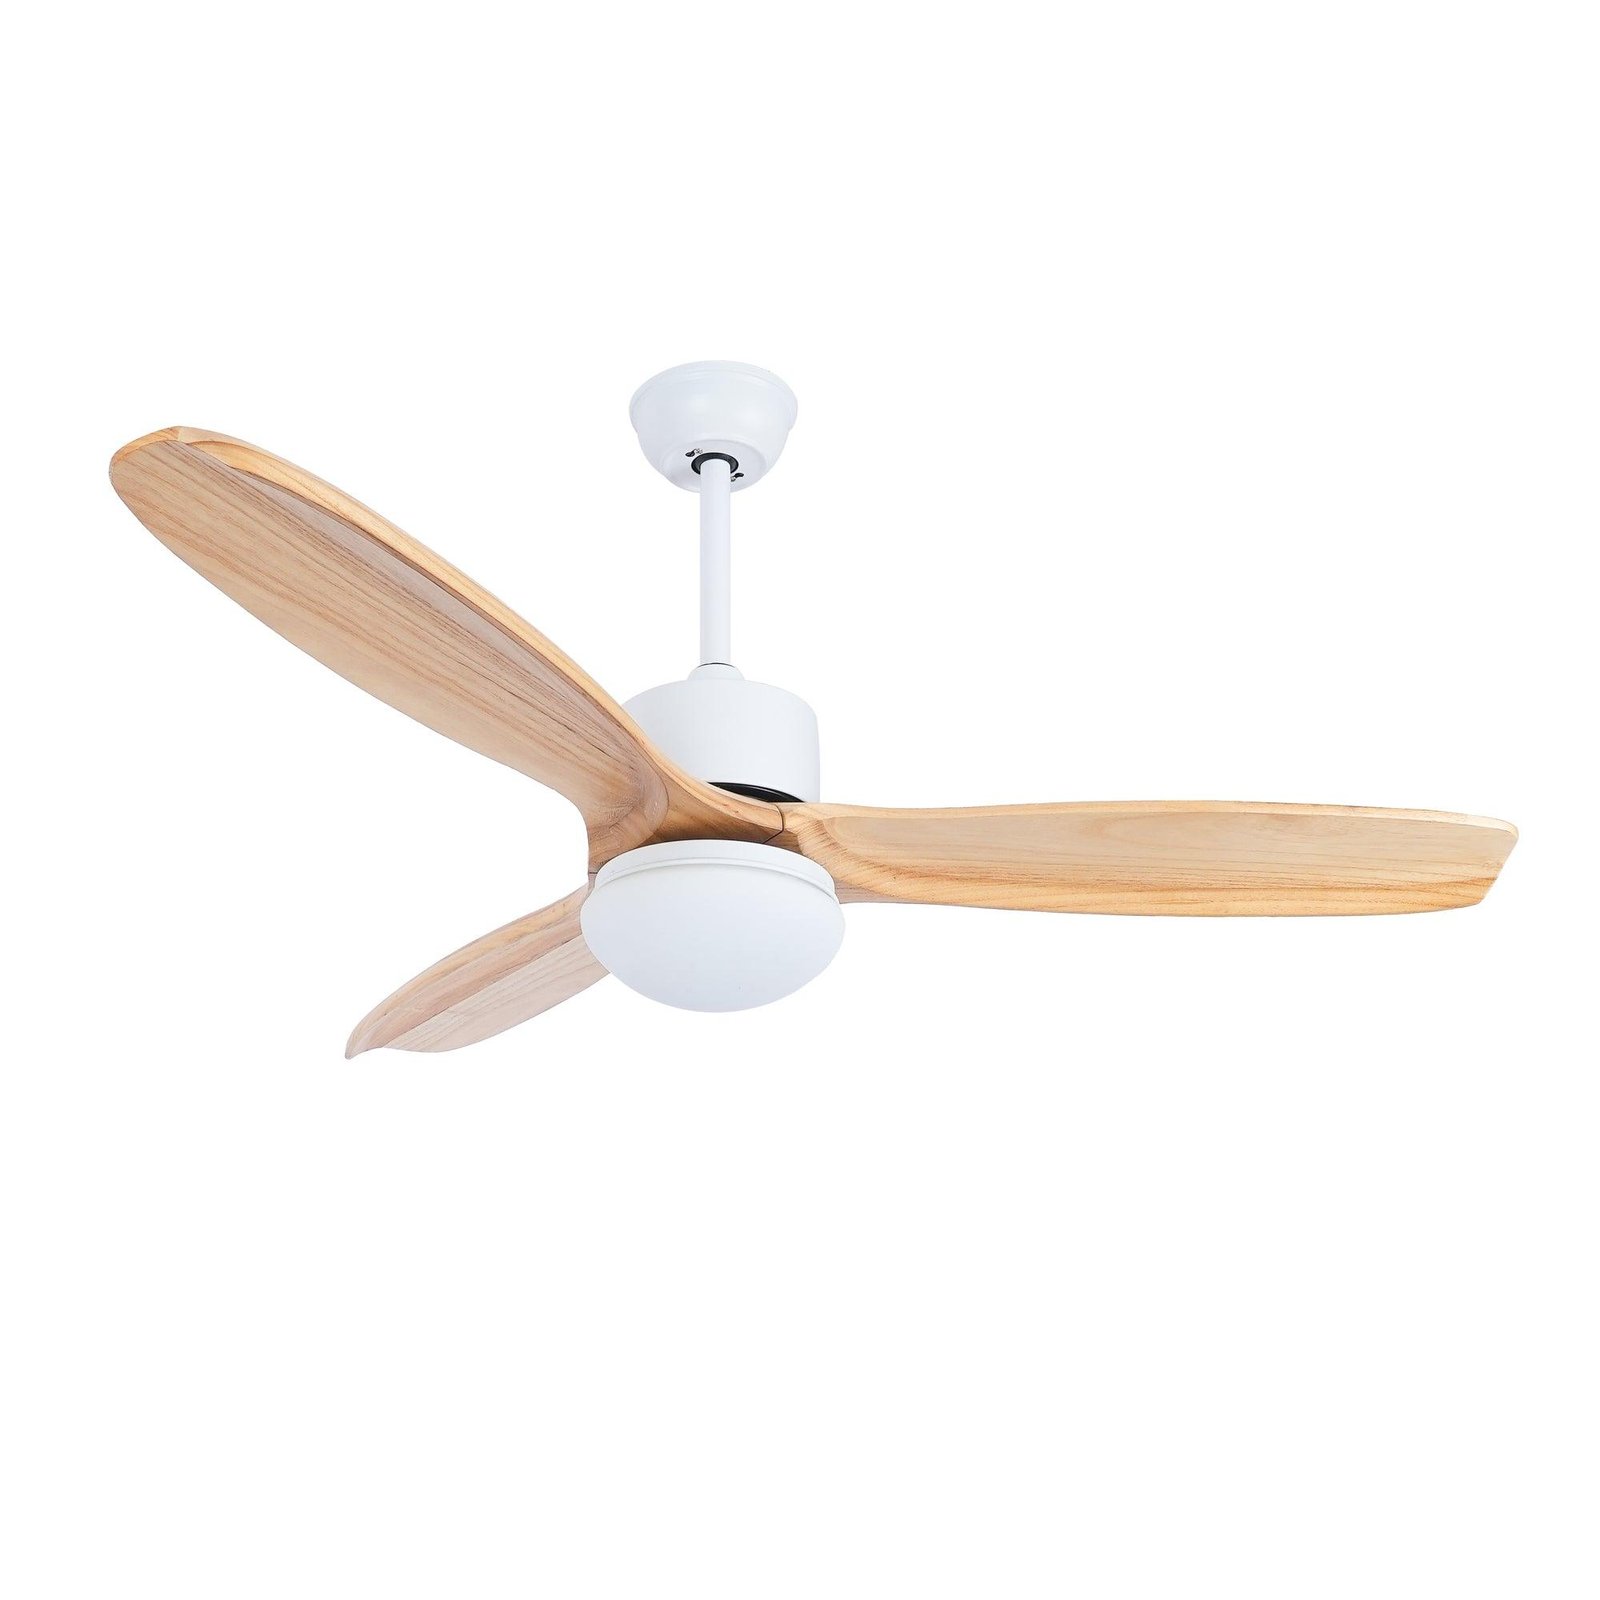 Ceiling fan light in white and wooden with dimensions of 52 inches in diameter and 14.2 inches in height (132cm x 36cm) under the name Harborough 3, suitable for 220V power.